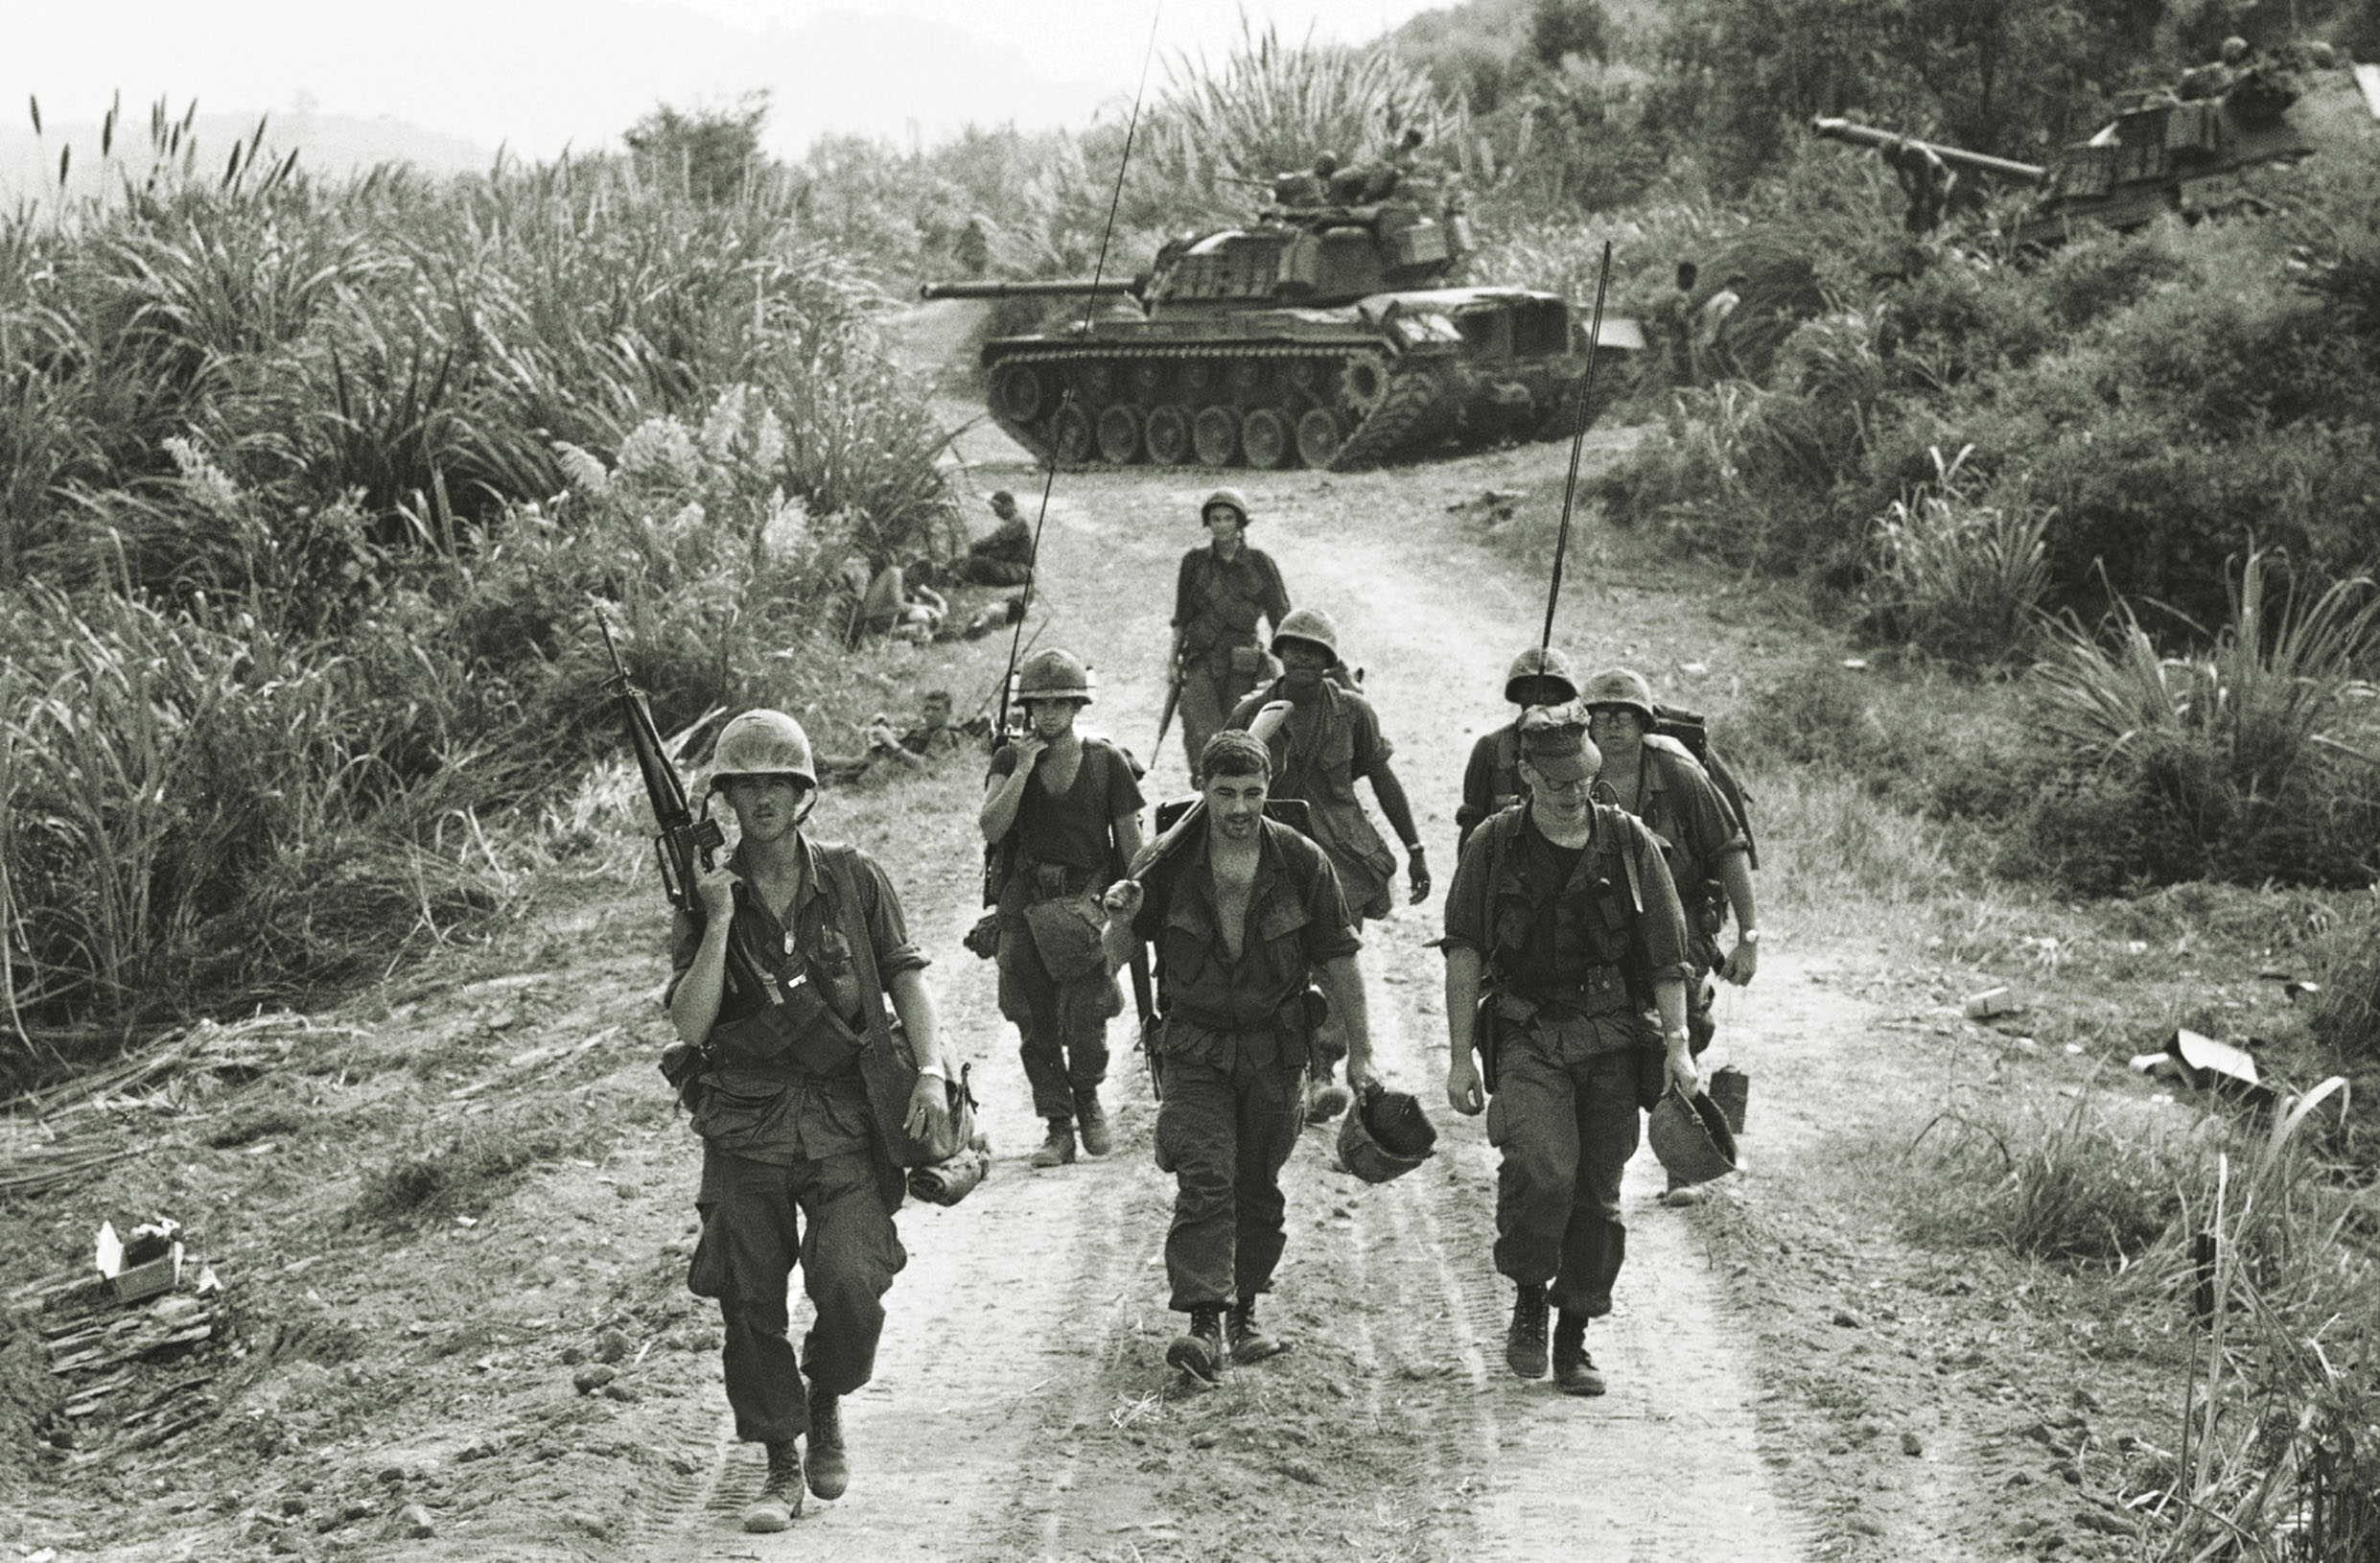 A Marine unit moves toward Khe Sanh on April 7, 1968, while a tank provides road security, during Operation Pegasus, which forced the North Vietnamese to end their siege. / AP